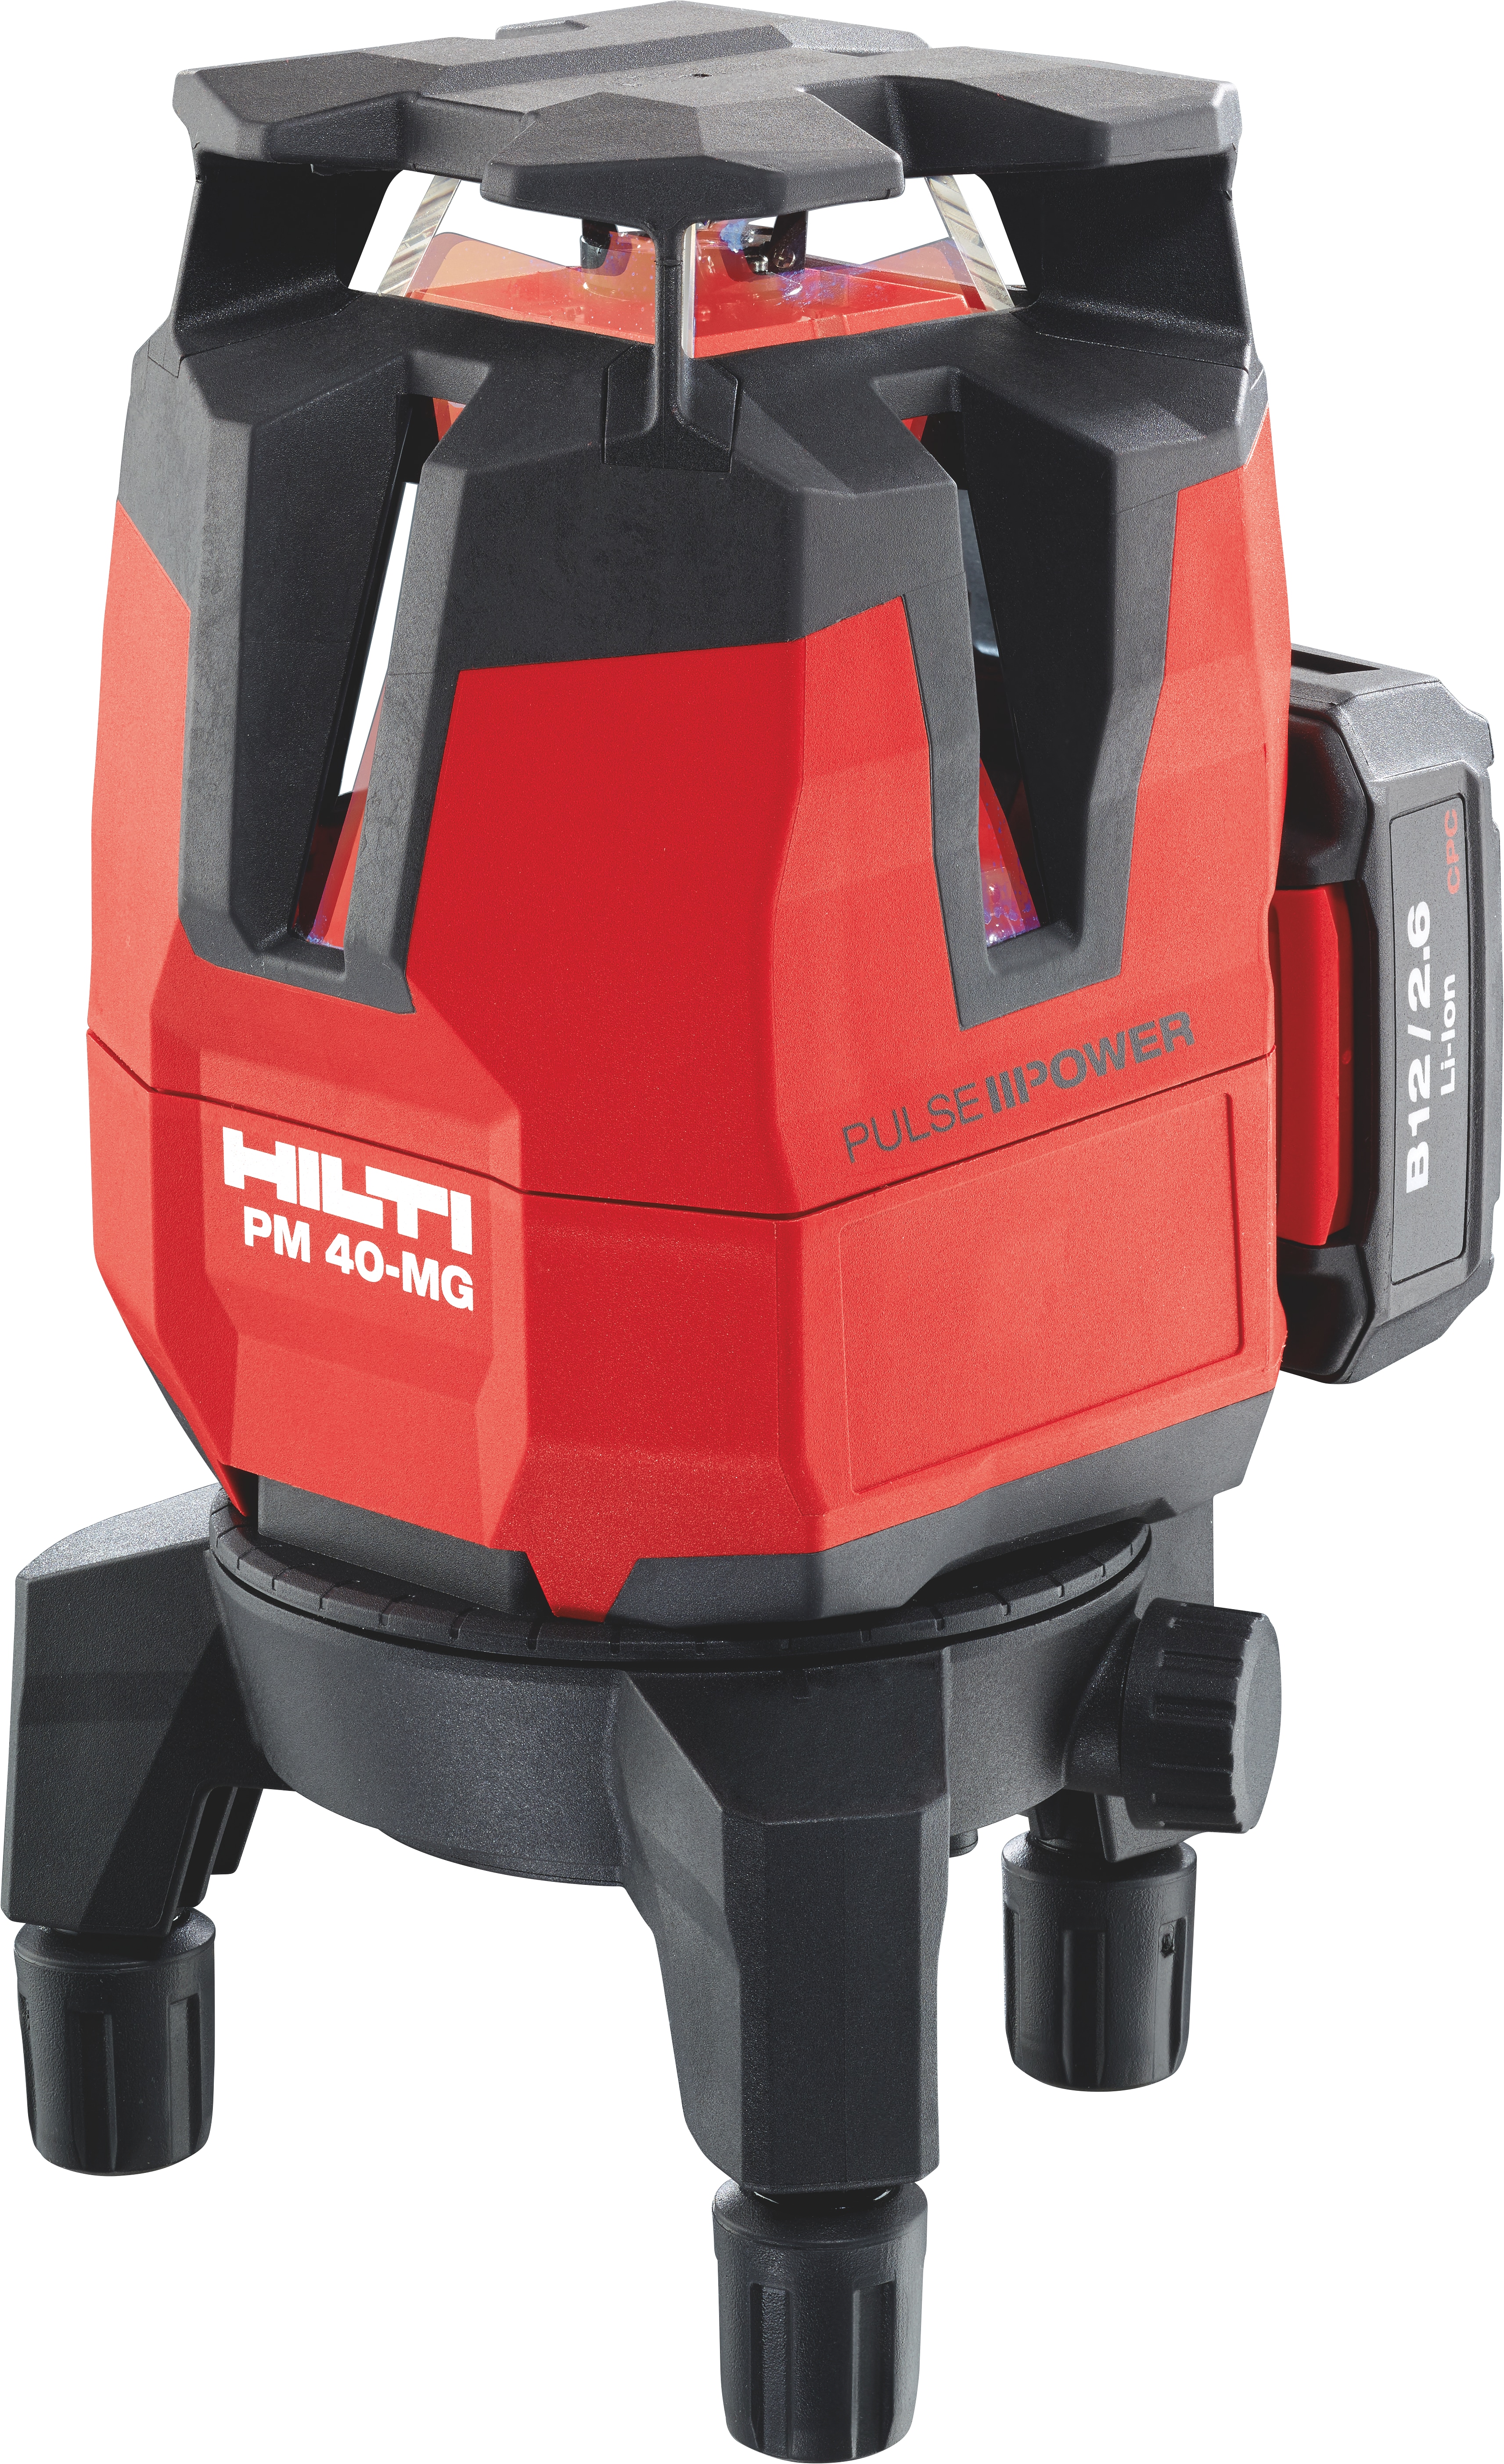 Hilti PM 40-MG multi-line laser package  in a tool case